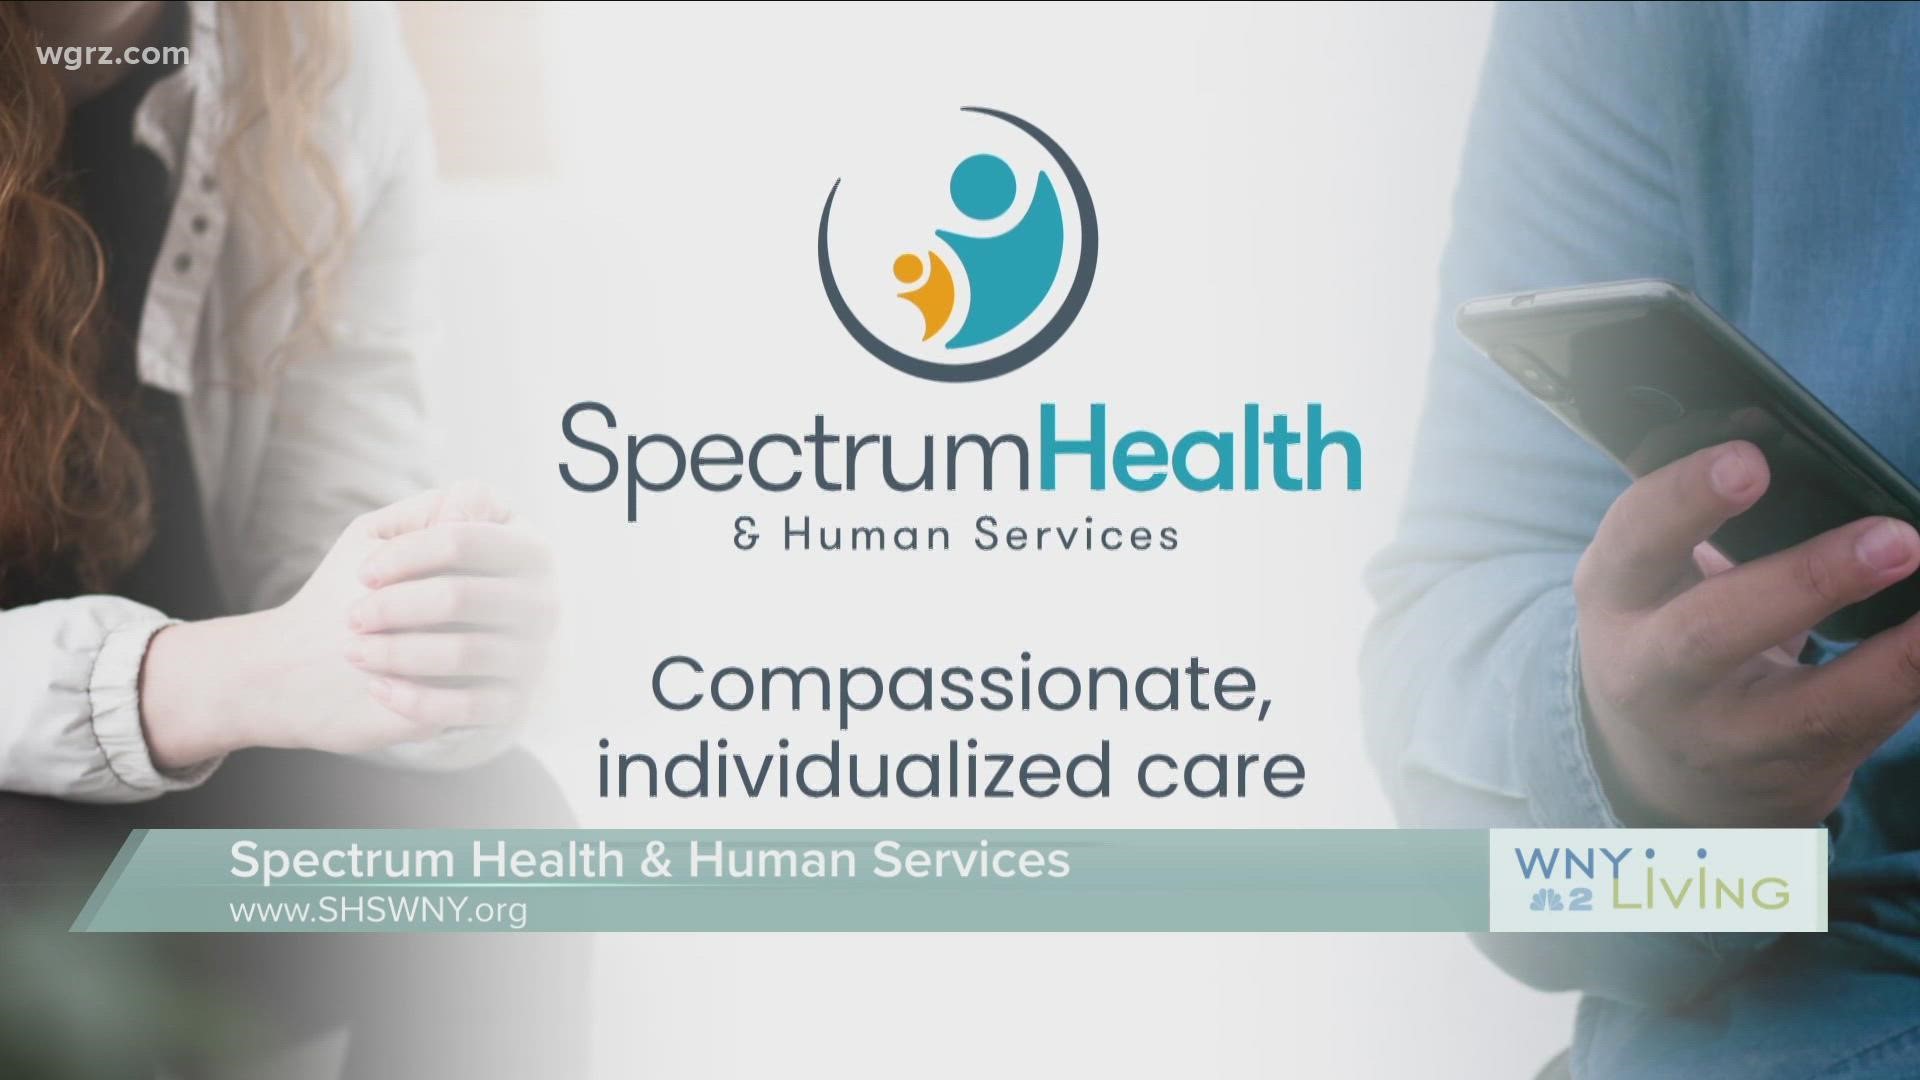 WNY Living - May 7 - Spectrum Health & Human Services (THIS VIDEO IS SPONSORED BY SPECTRUM HEALTH & HUMAN SERVICES)